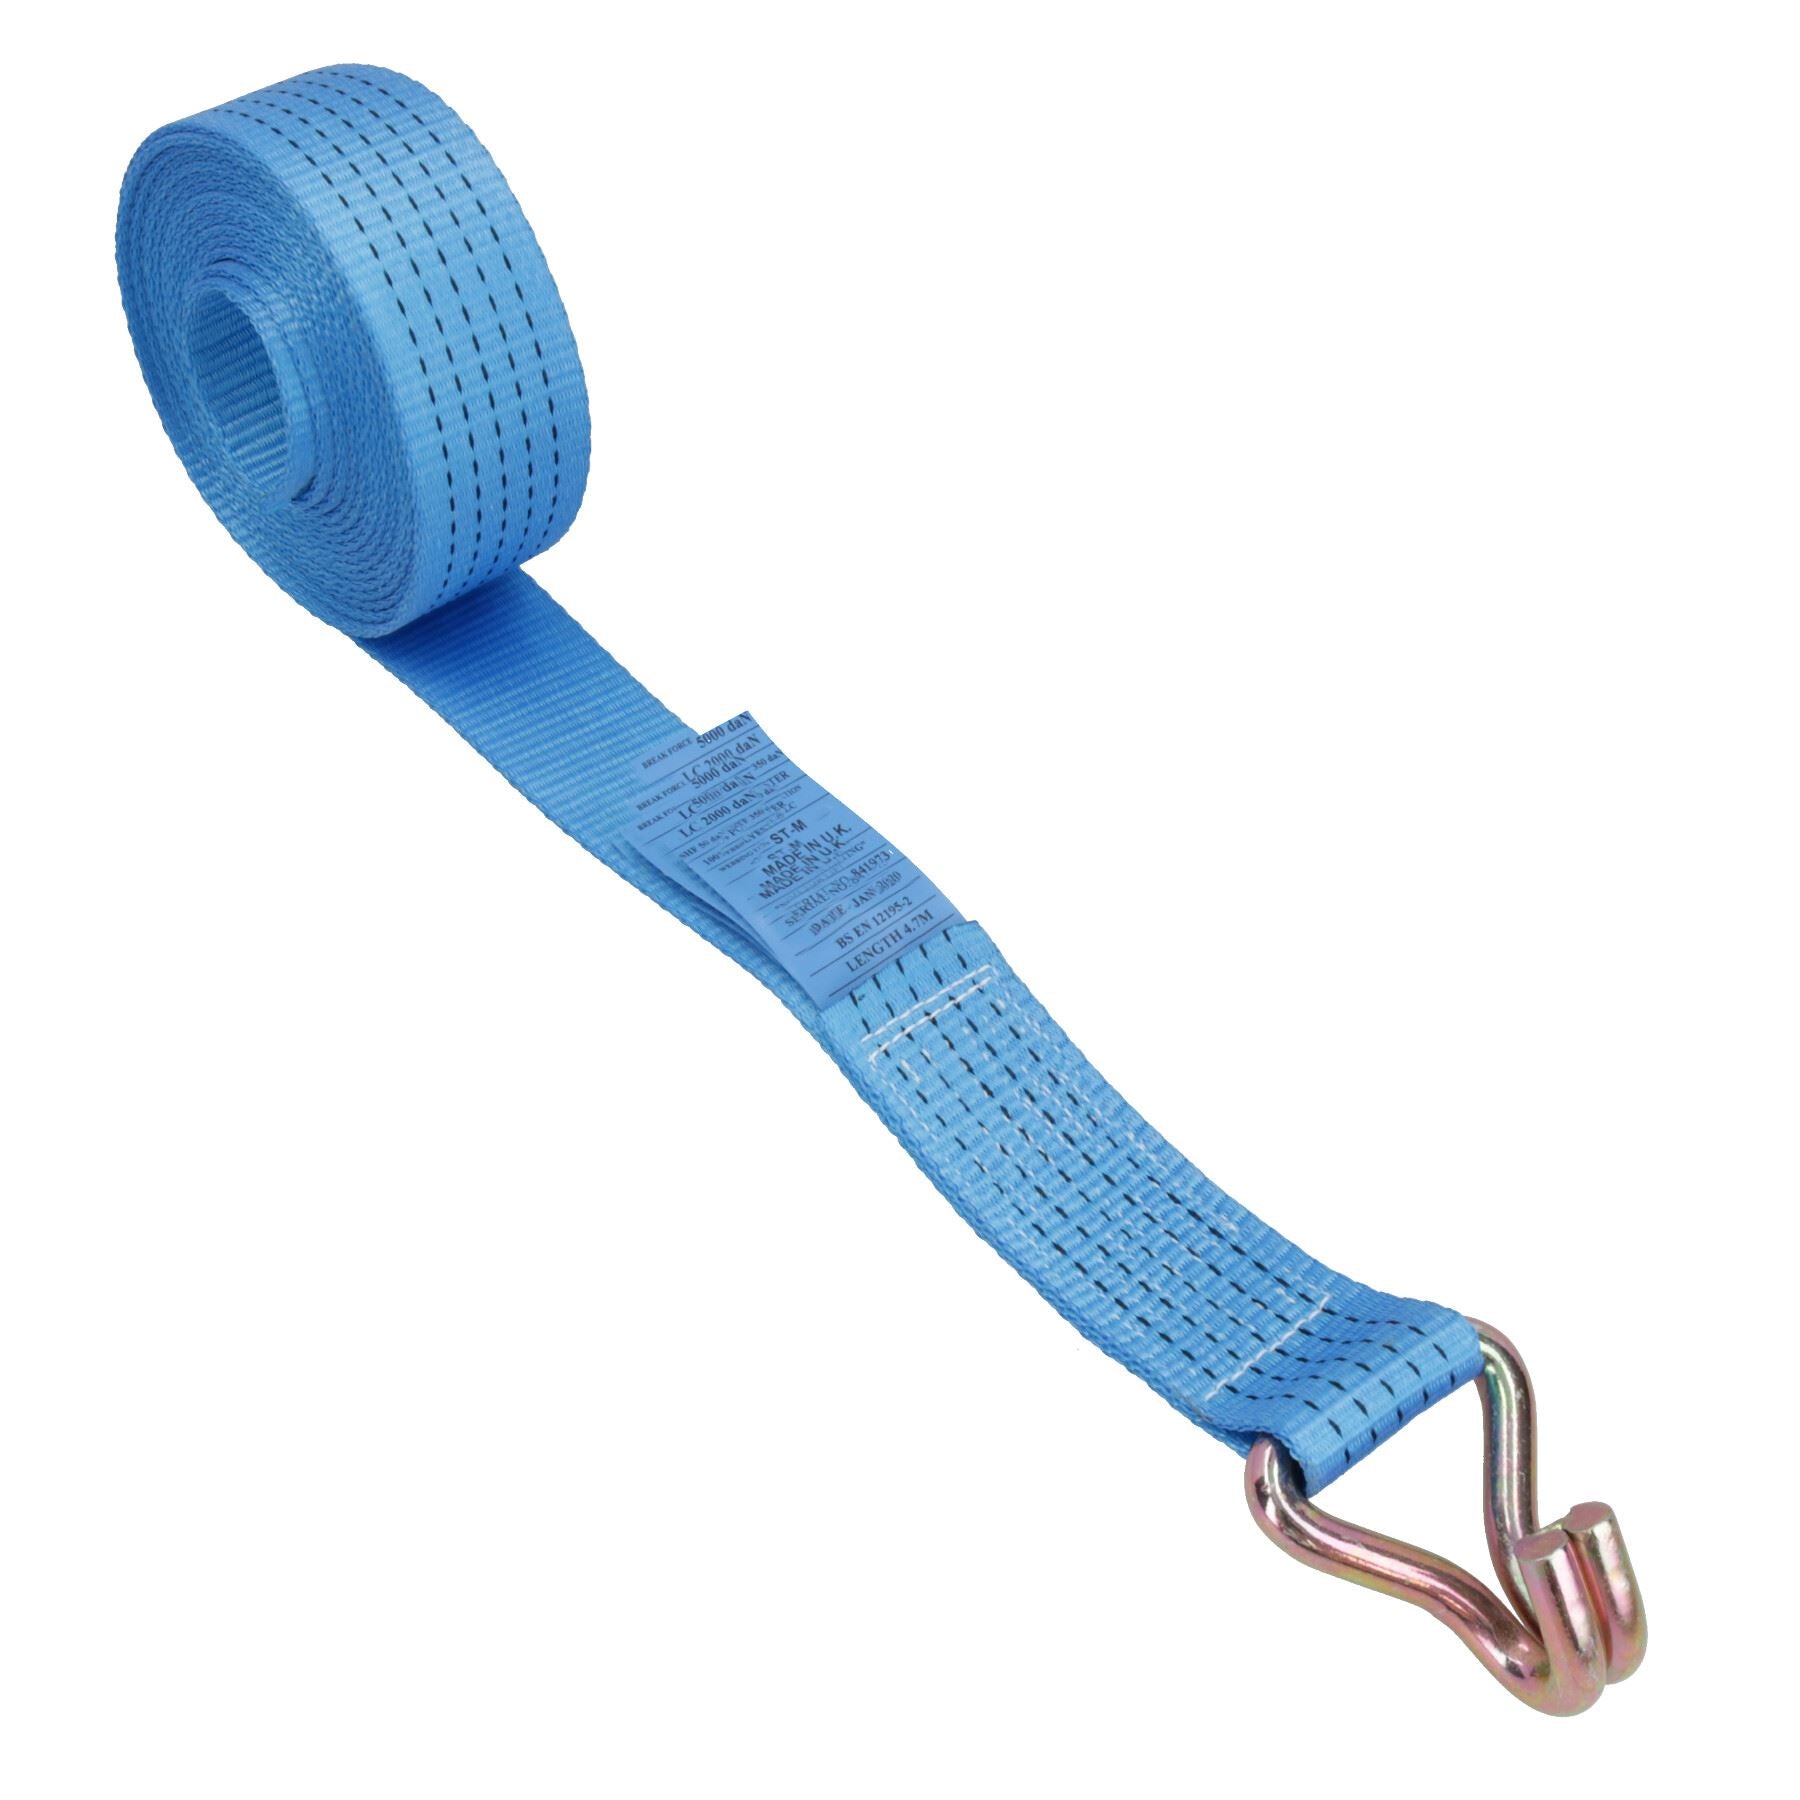 Spare Strap for Ratchet Trailer Tie Down 5m 2.5 Ton Lashing